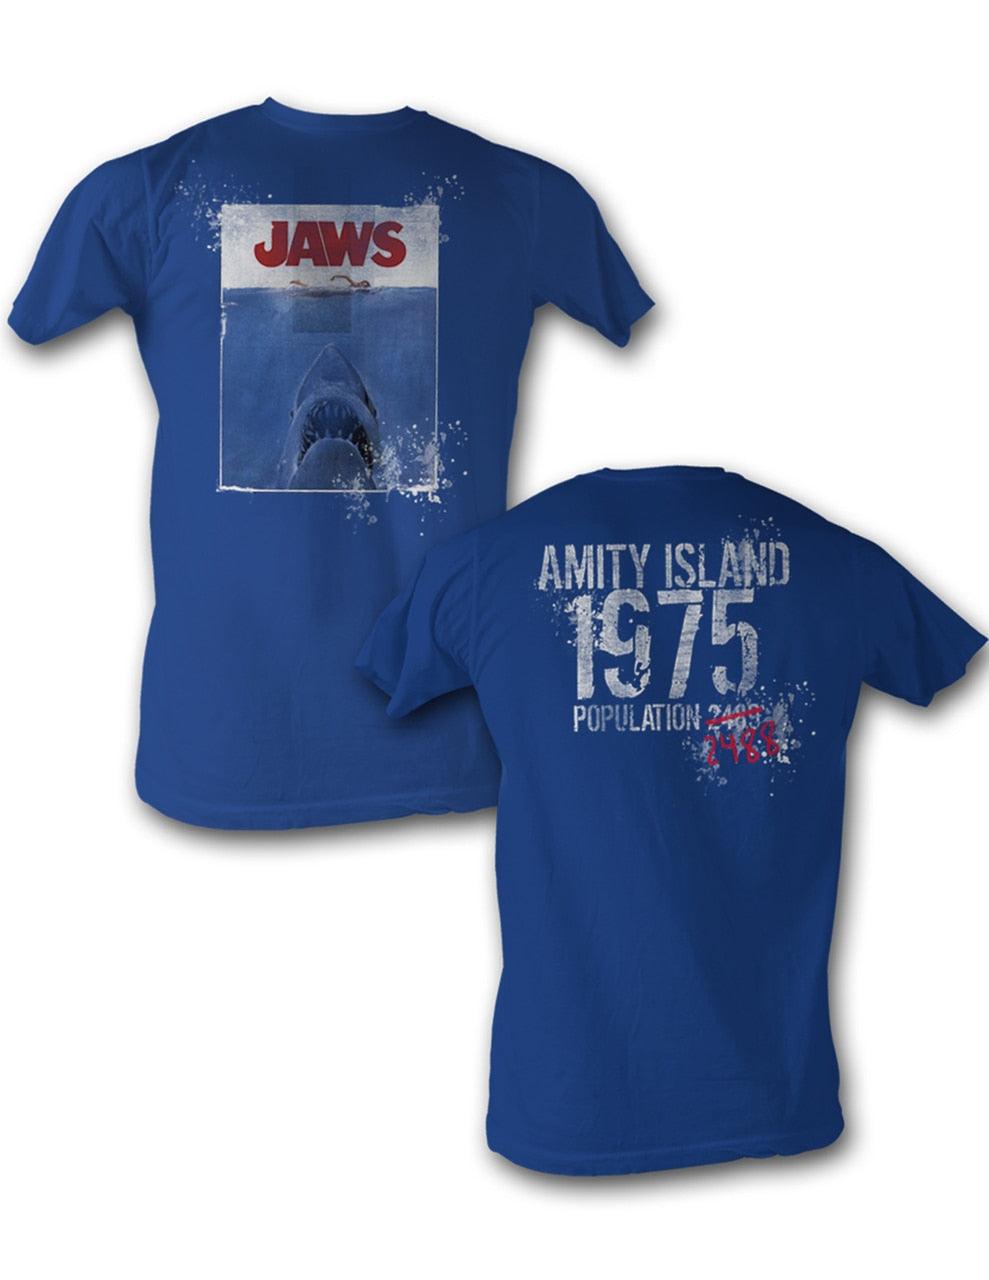 JAWS Movie T-Shirts and Great White Shark Apparel